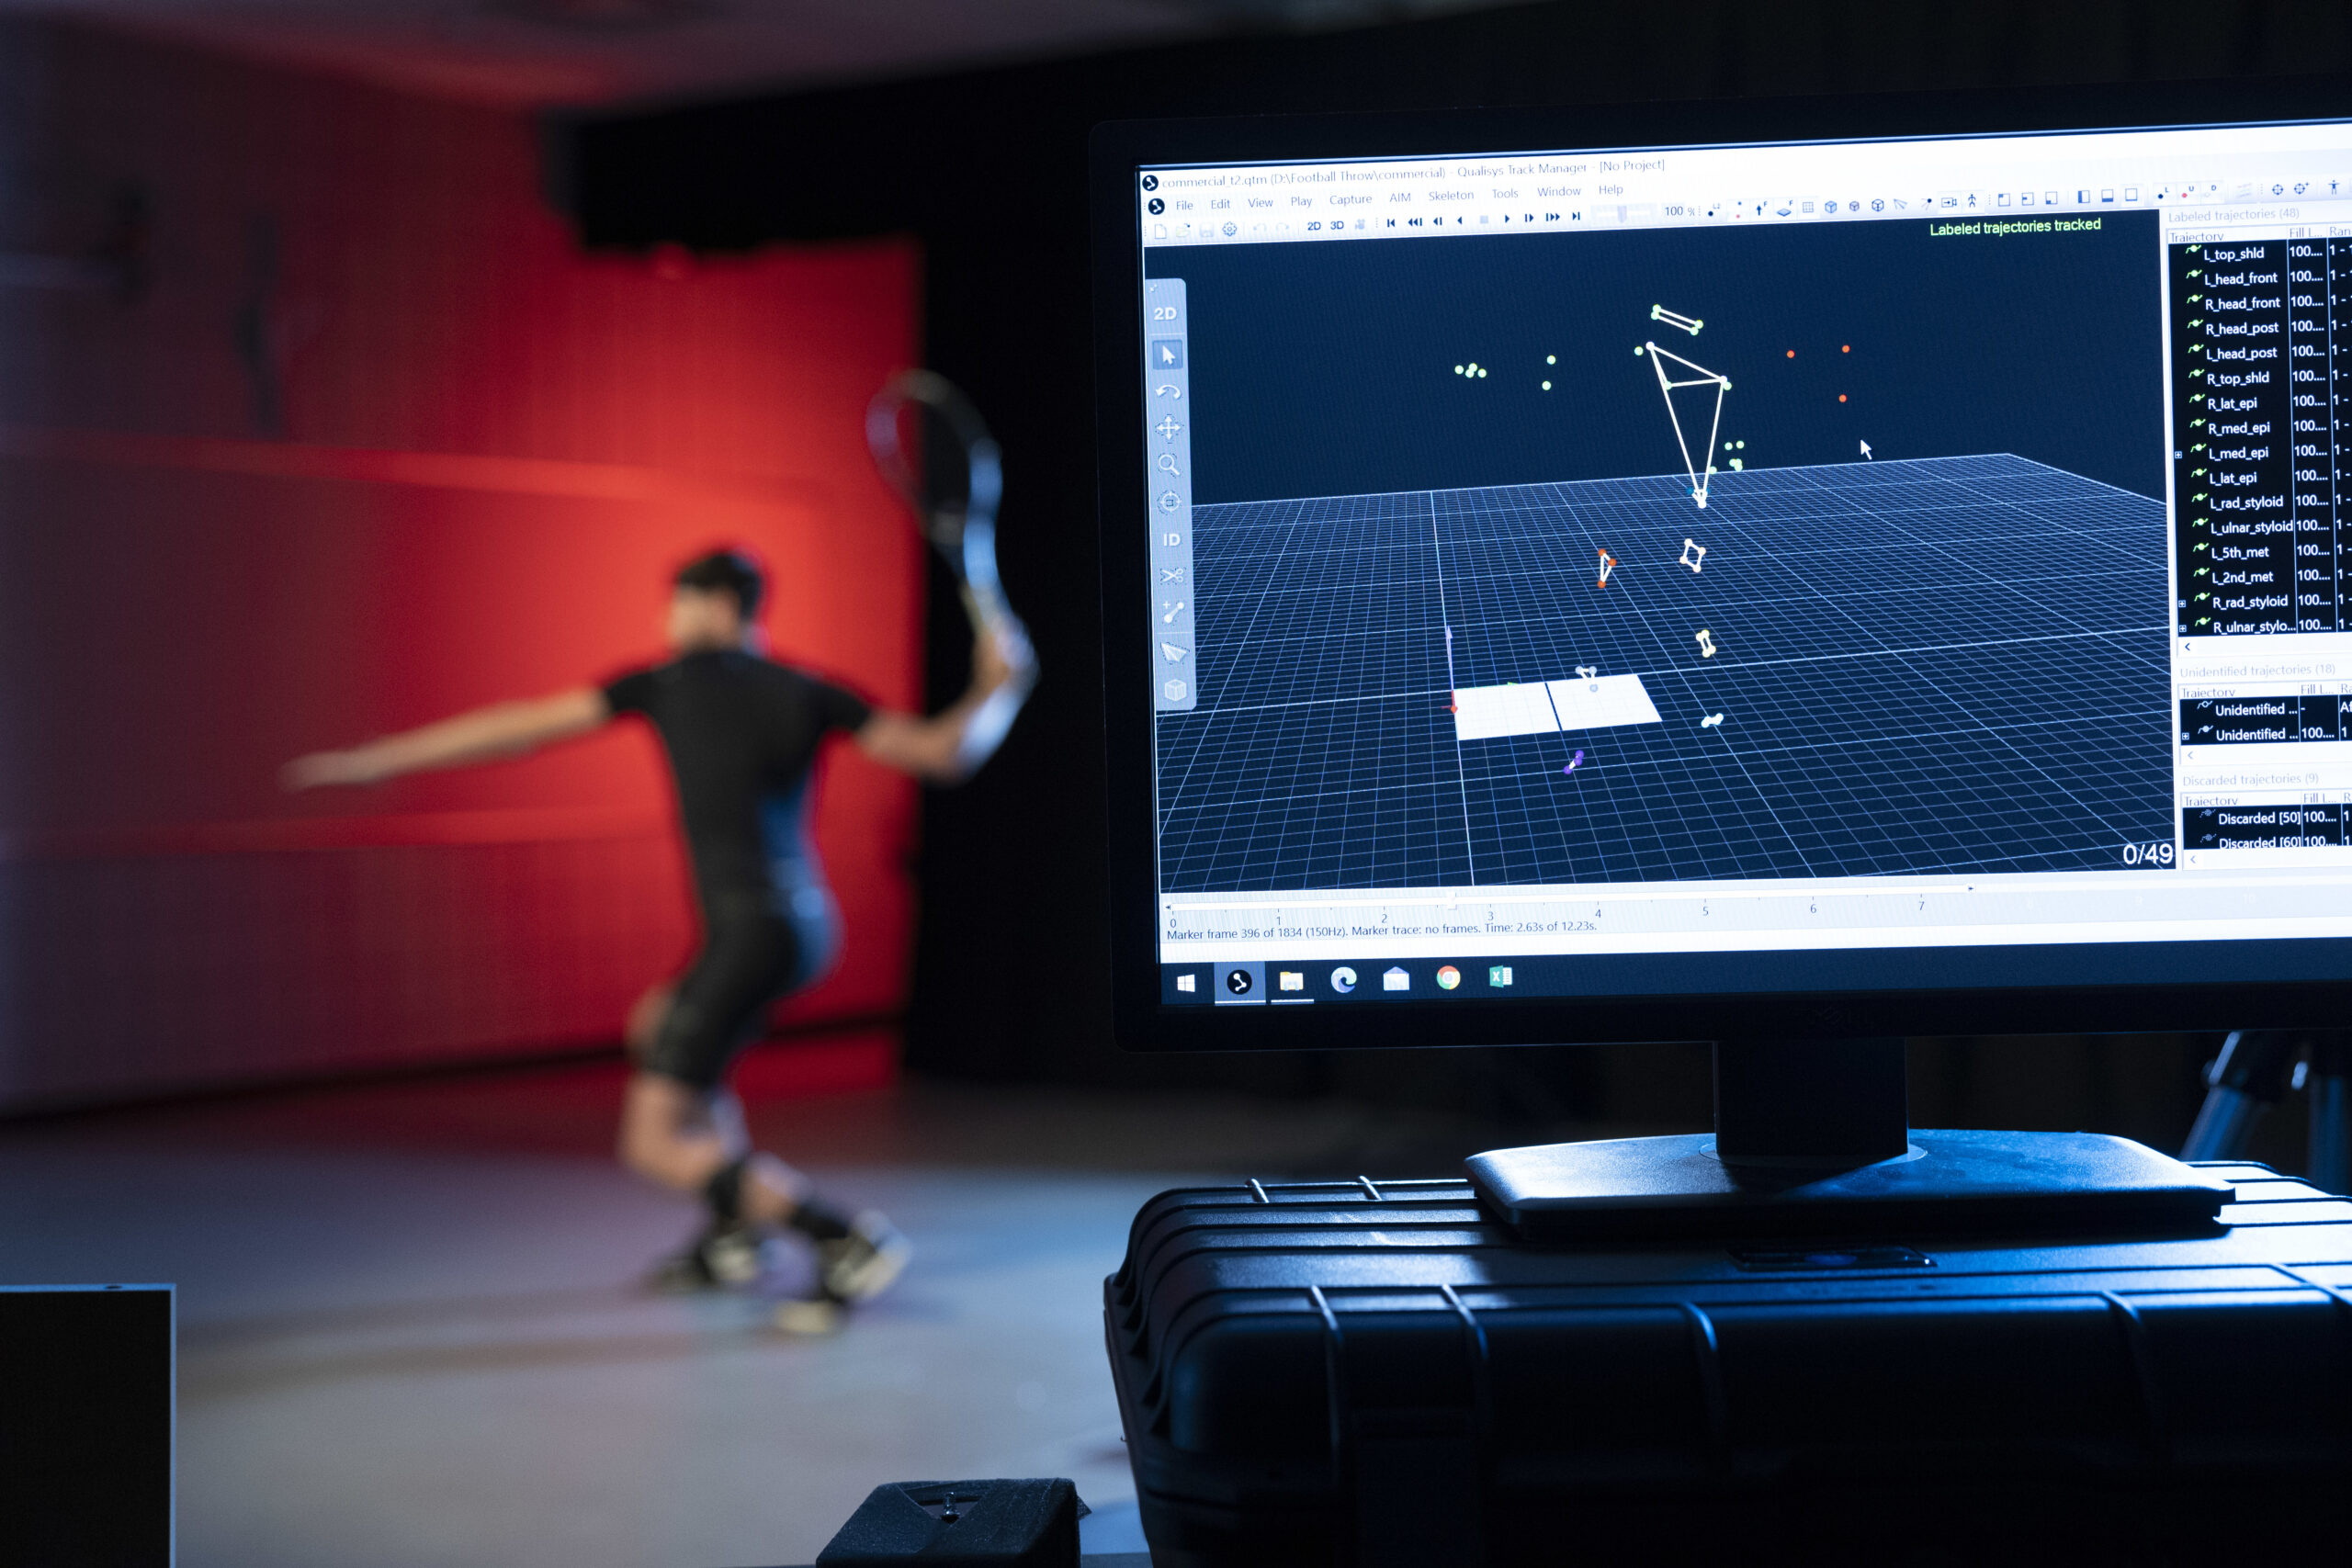 Conner Smith participates in a study in the bio-mechanics laboratory at the Ramsey Center. They are using motion capture to record his tennis swing.